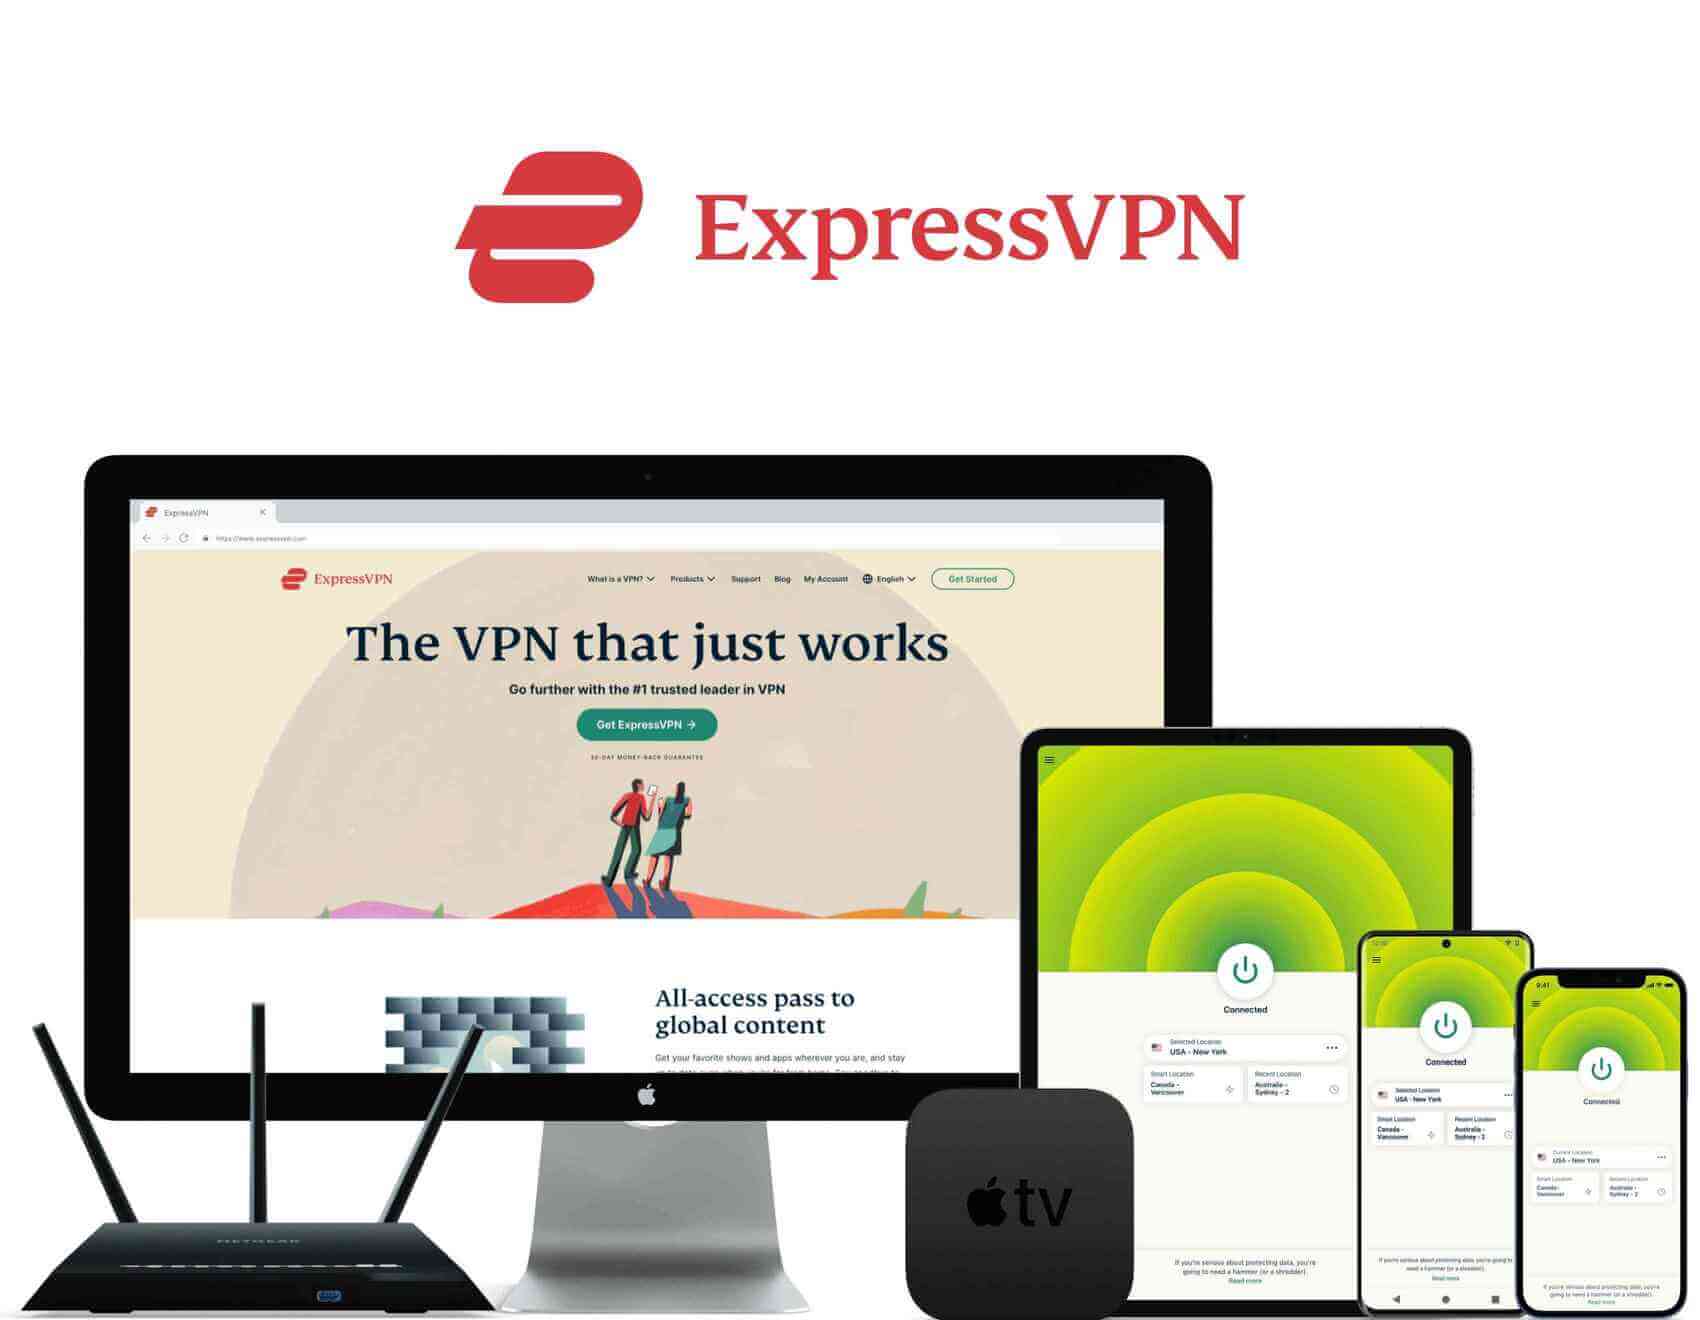 Devices compatible with ExpressVPN